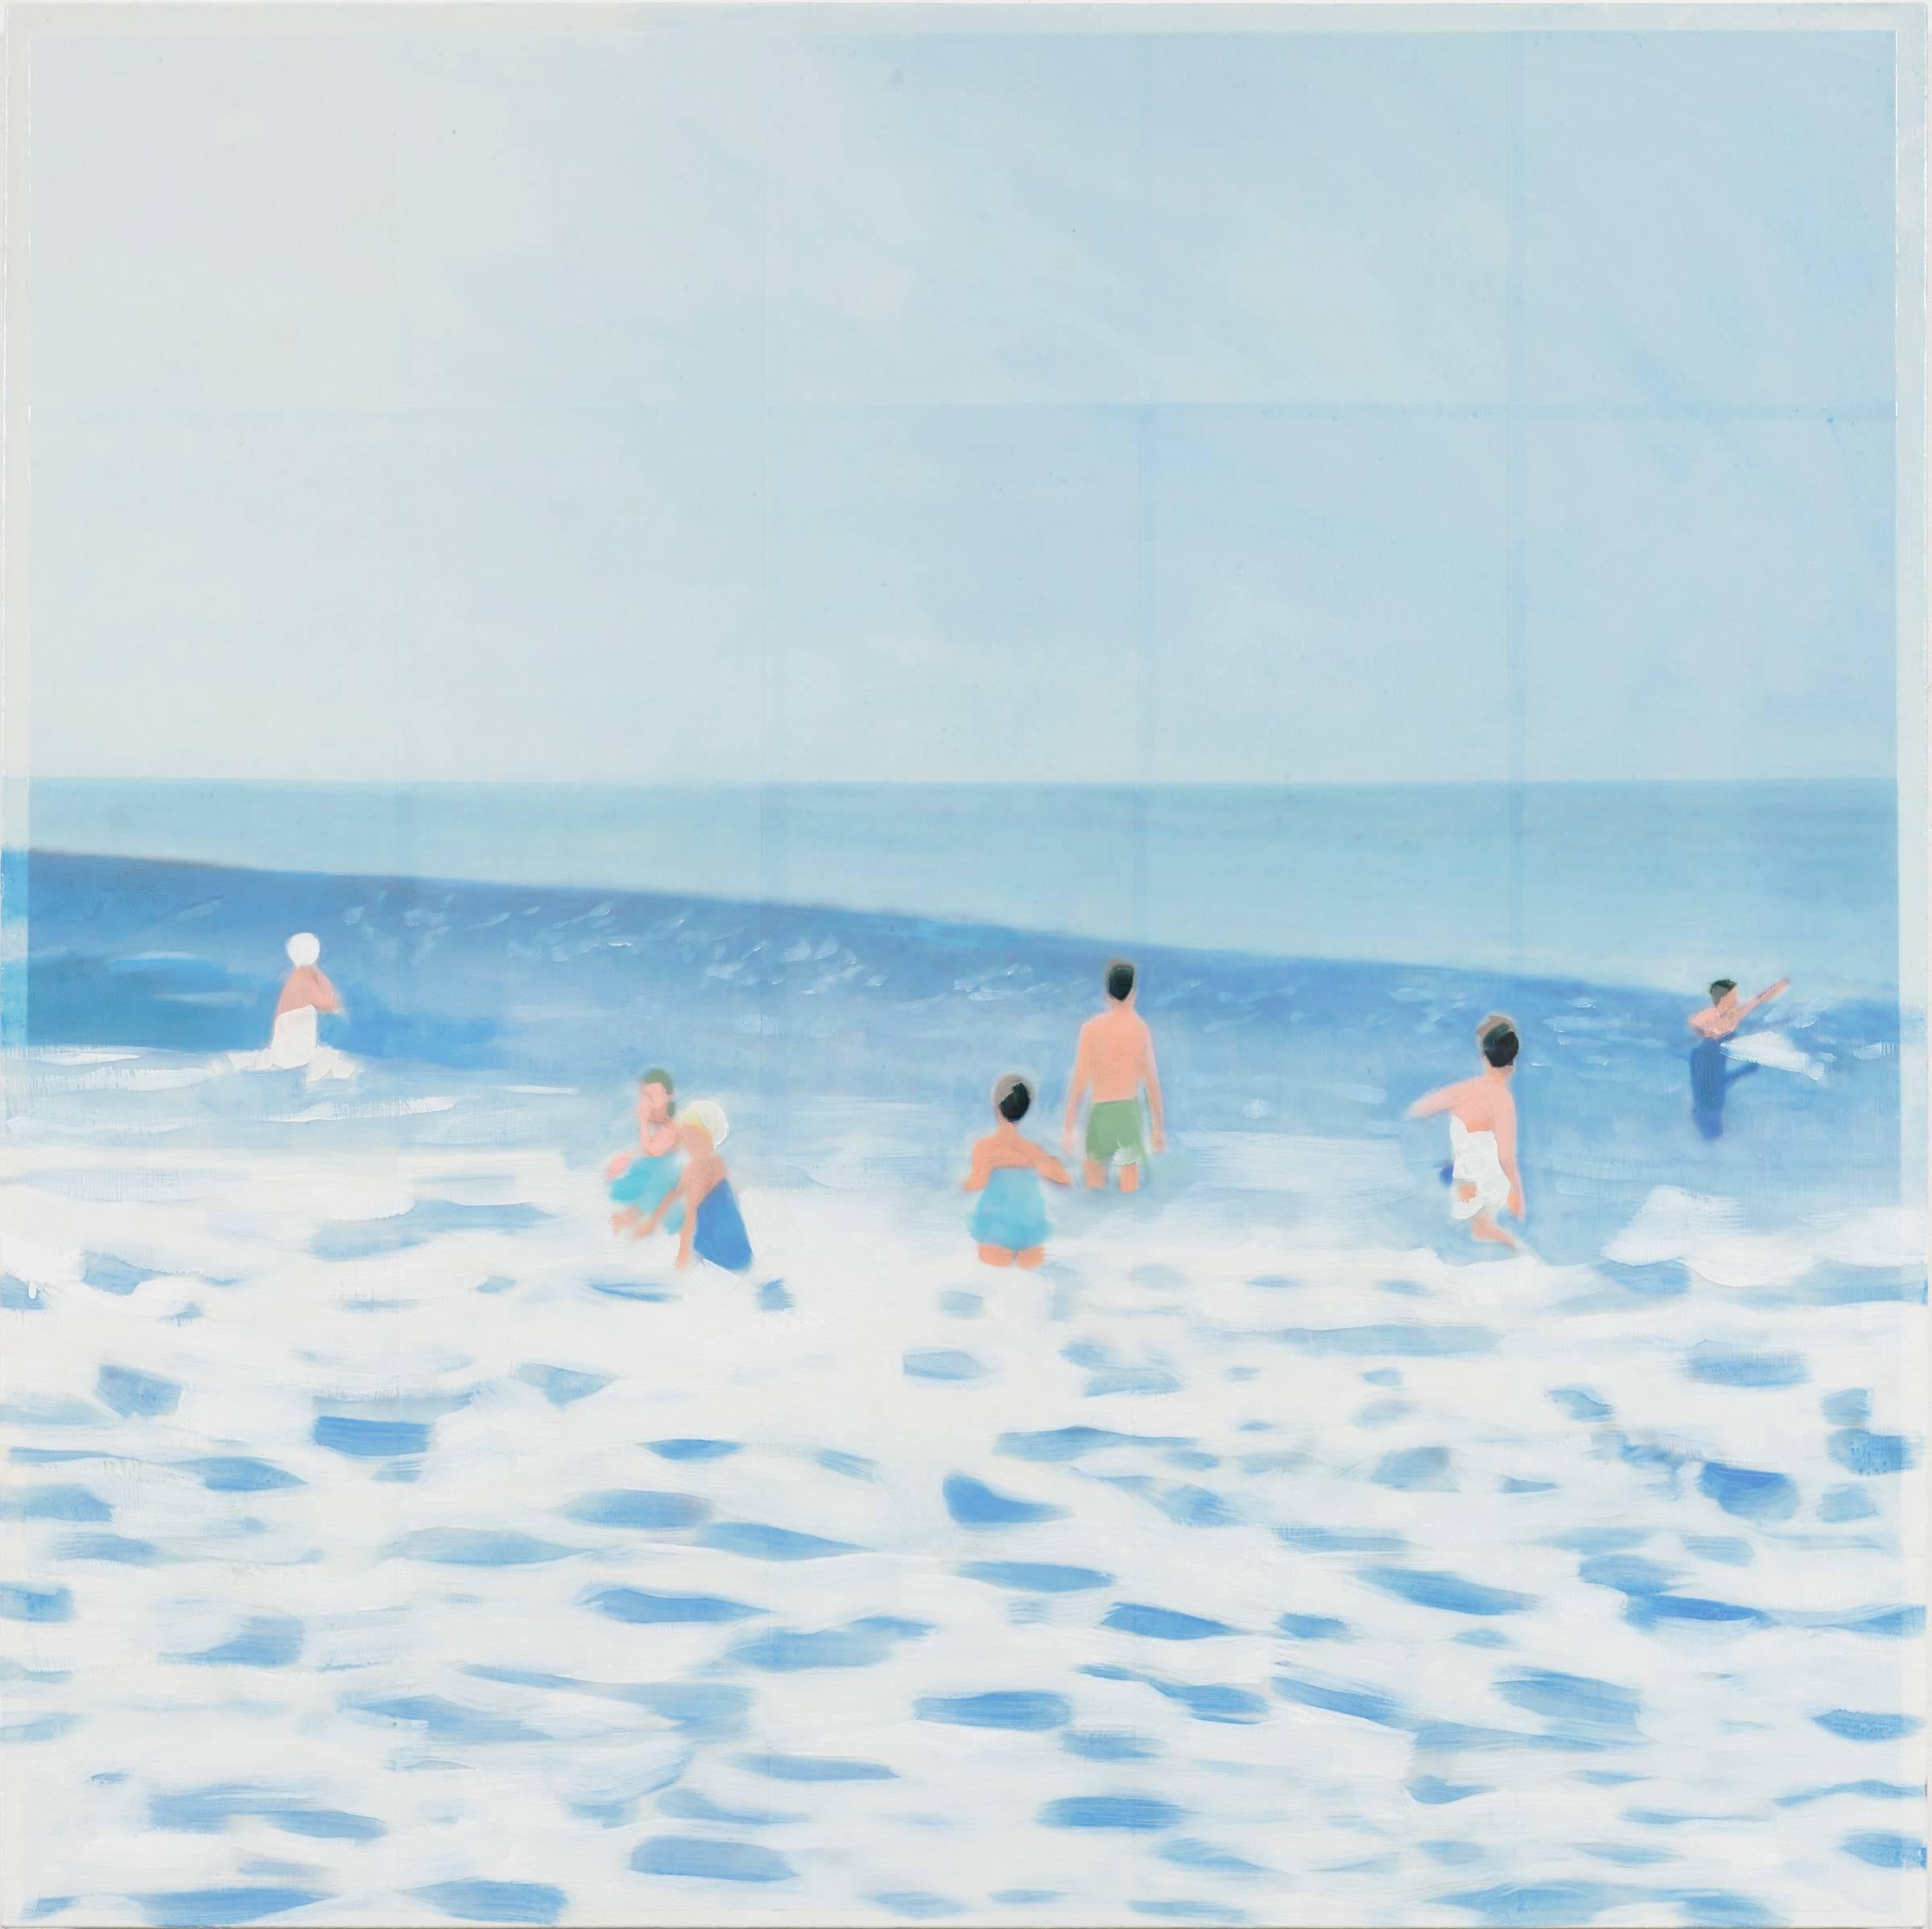 Bathers - Painting by Isca Greenfield-Sanders